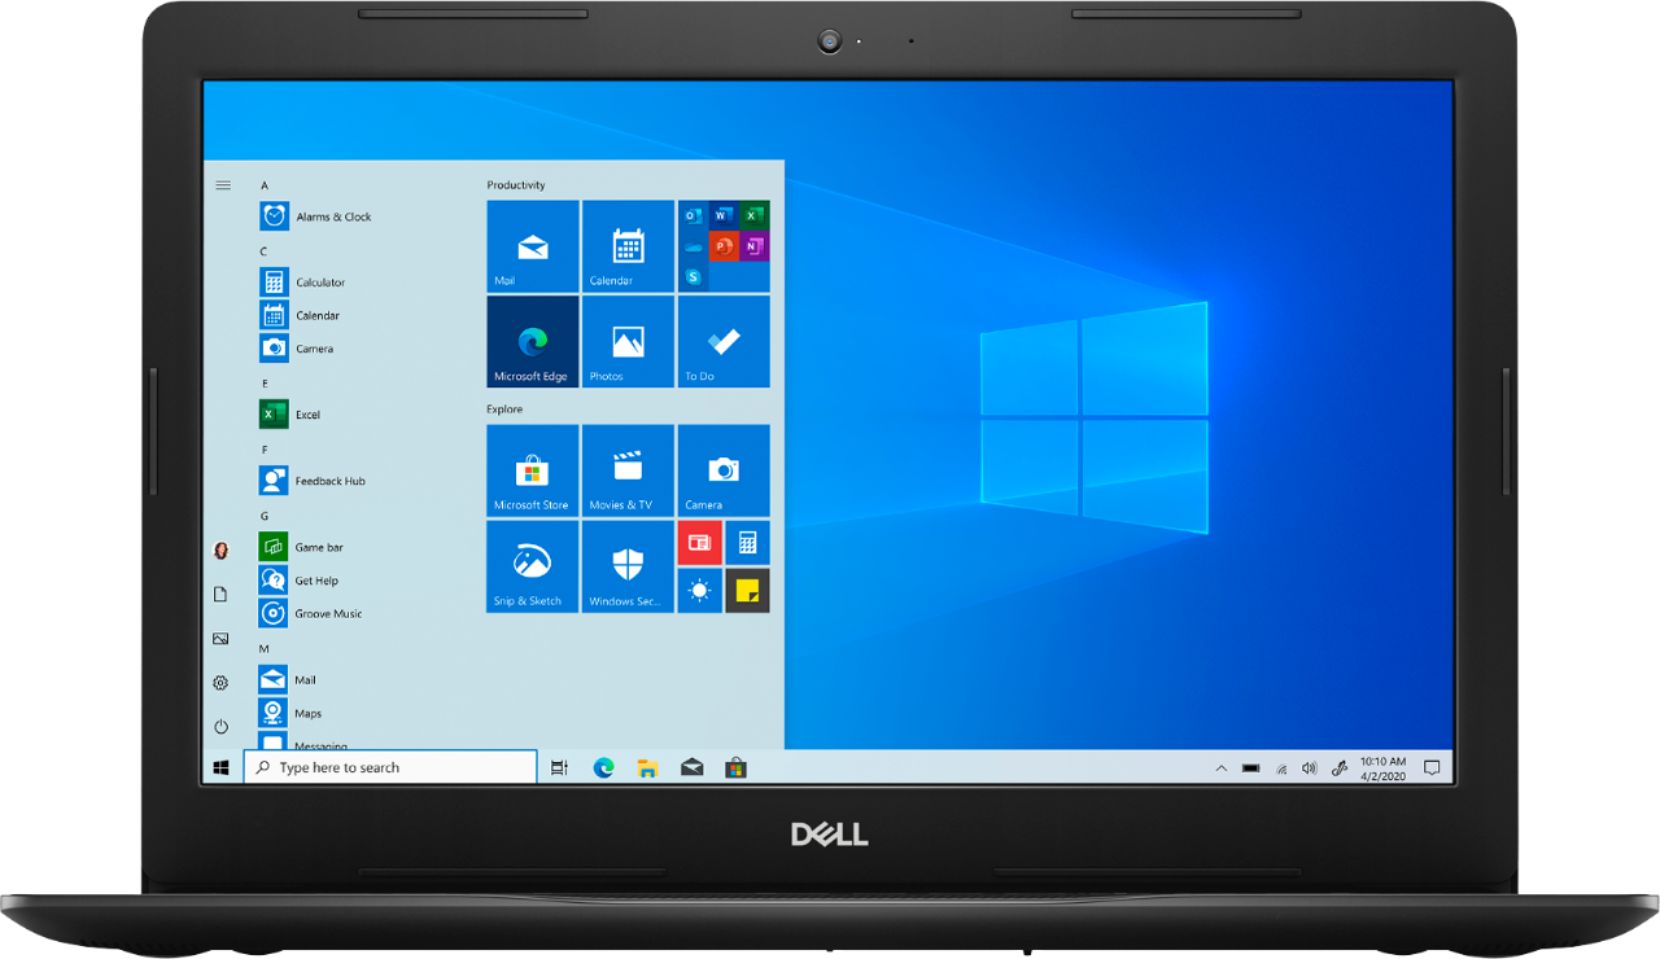 Dell Inspiron 15 3593 15 6 Hd Touch Screen Laptop Intel Core I7 12gb Memory 512gb Ssd Black I3593 7644blk Pus Best Buy